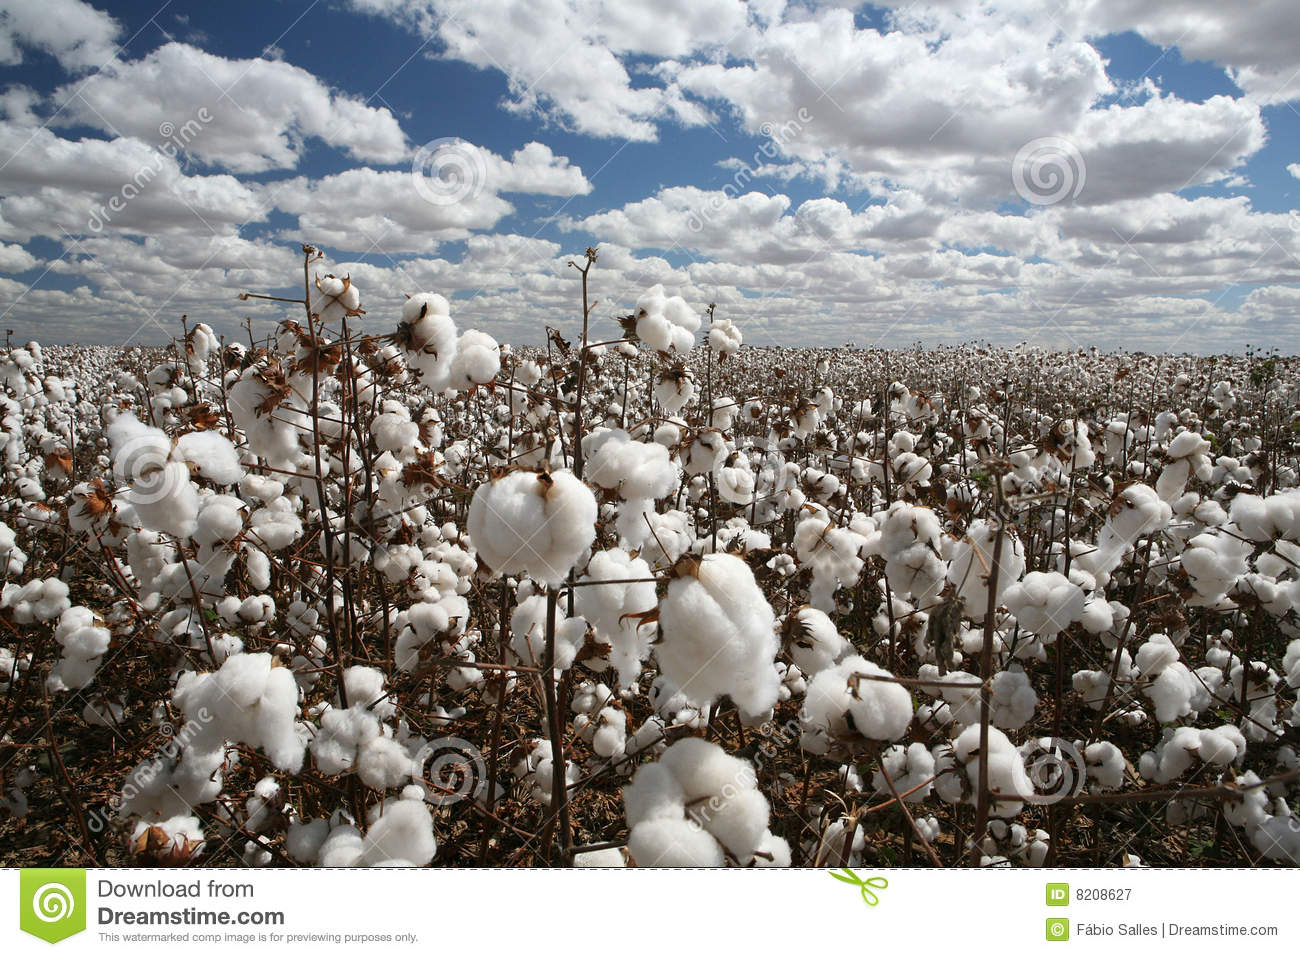 Plantation Of Cotton Contrast With Clouds And Sky 